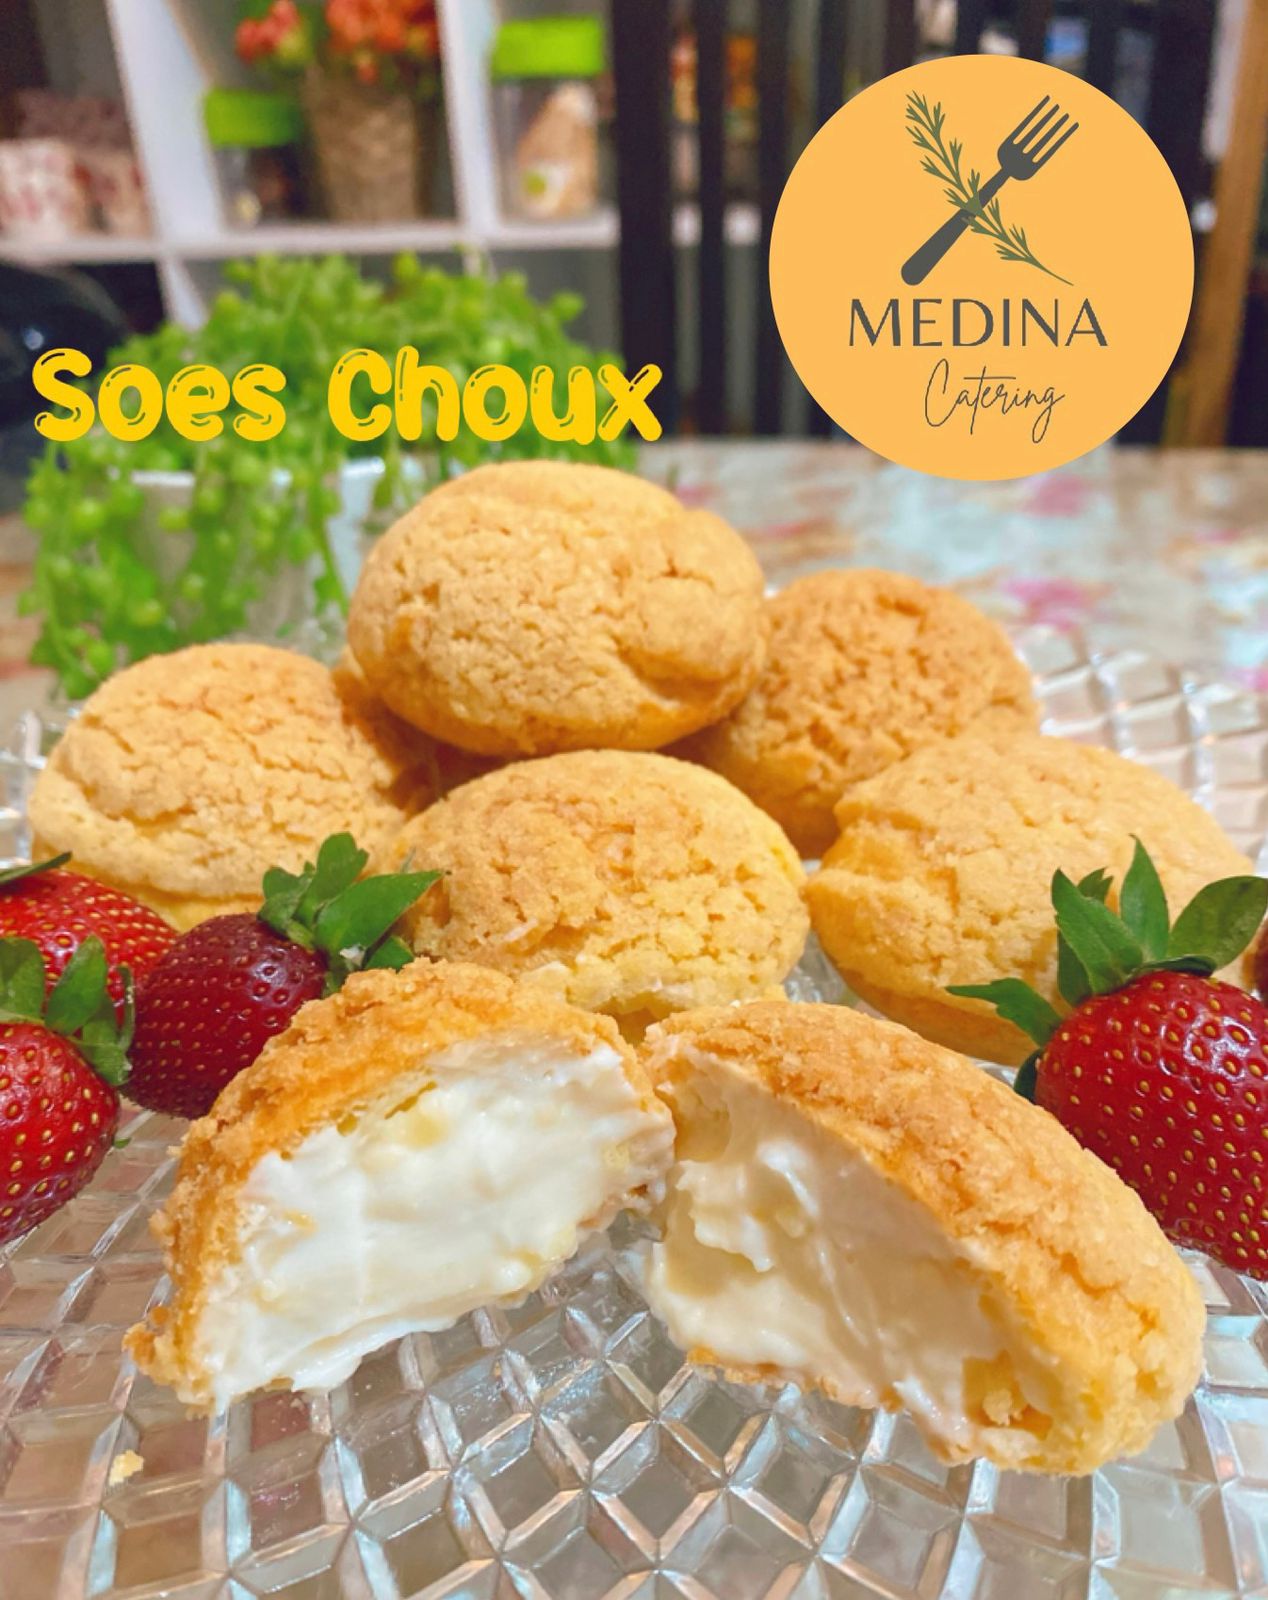 Soes Choux